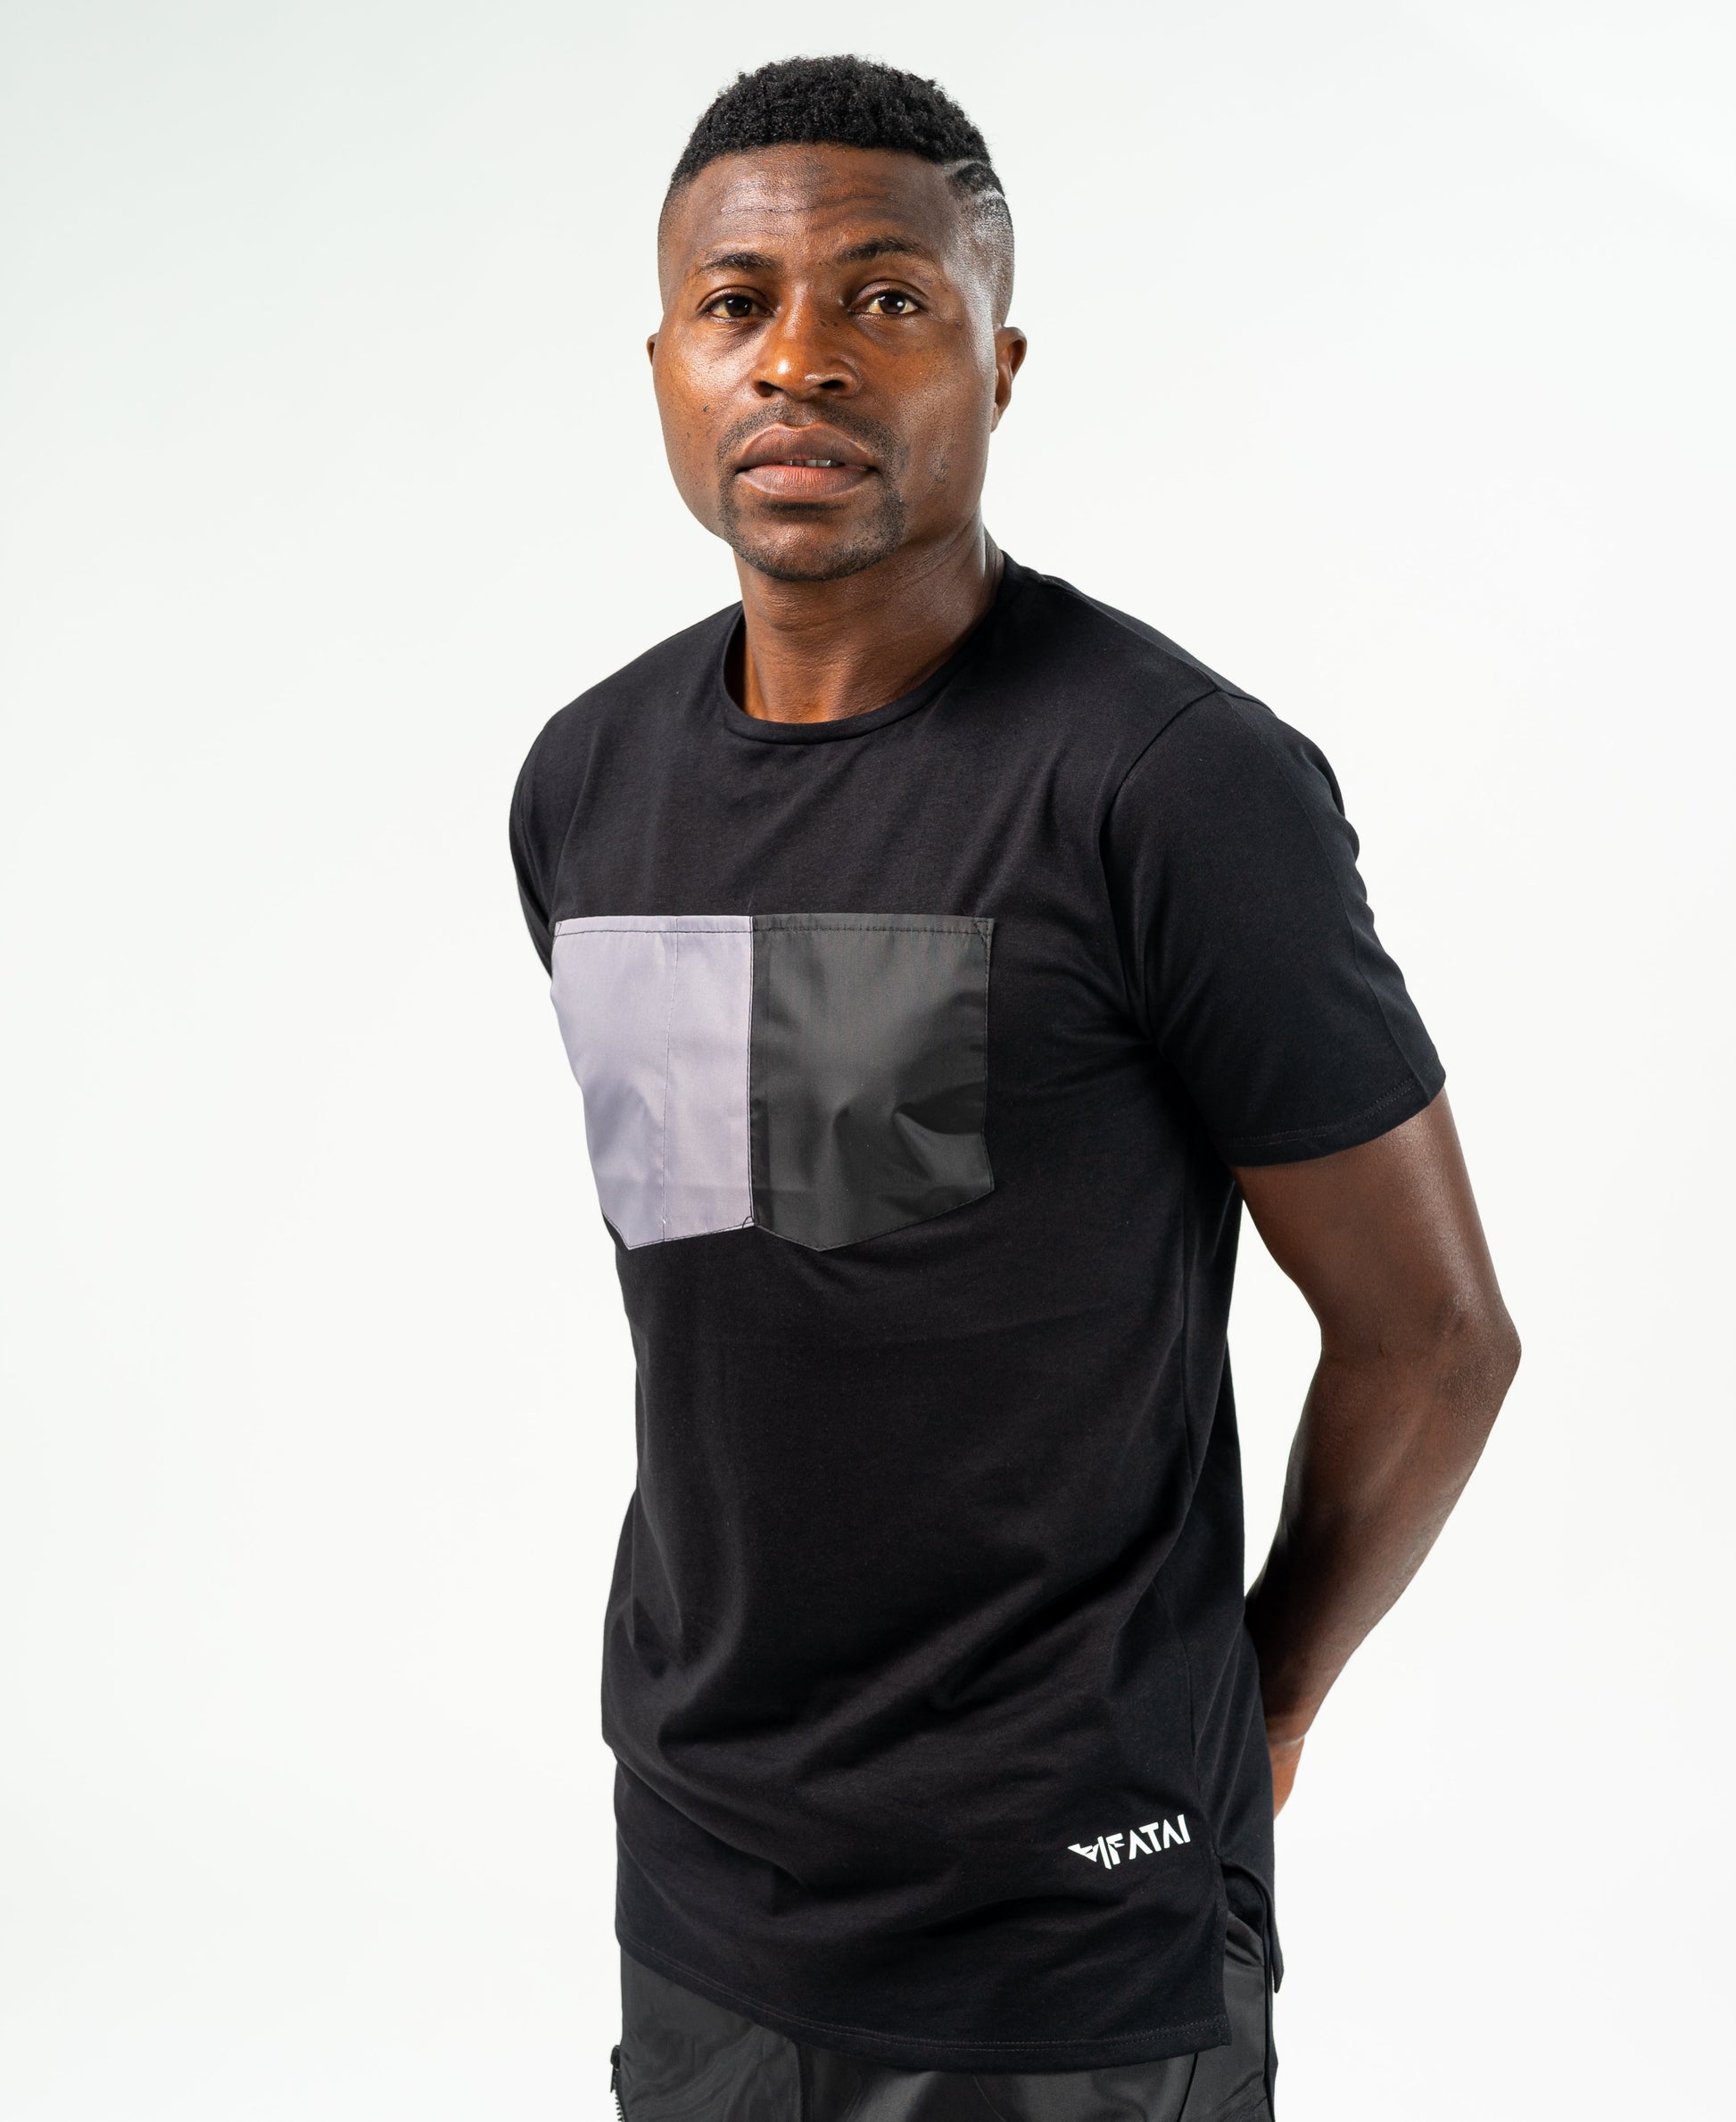 Black t-shirt with black and grey design - Fatai Style